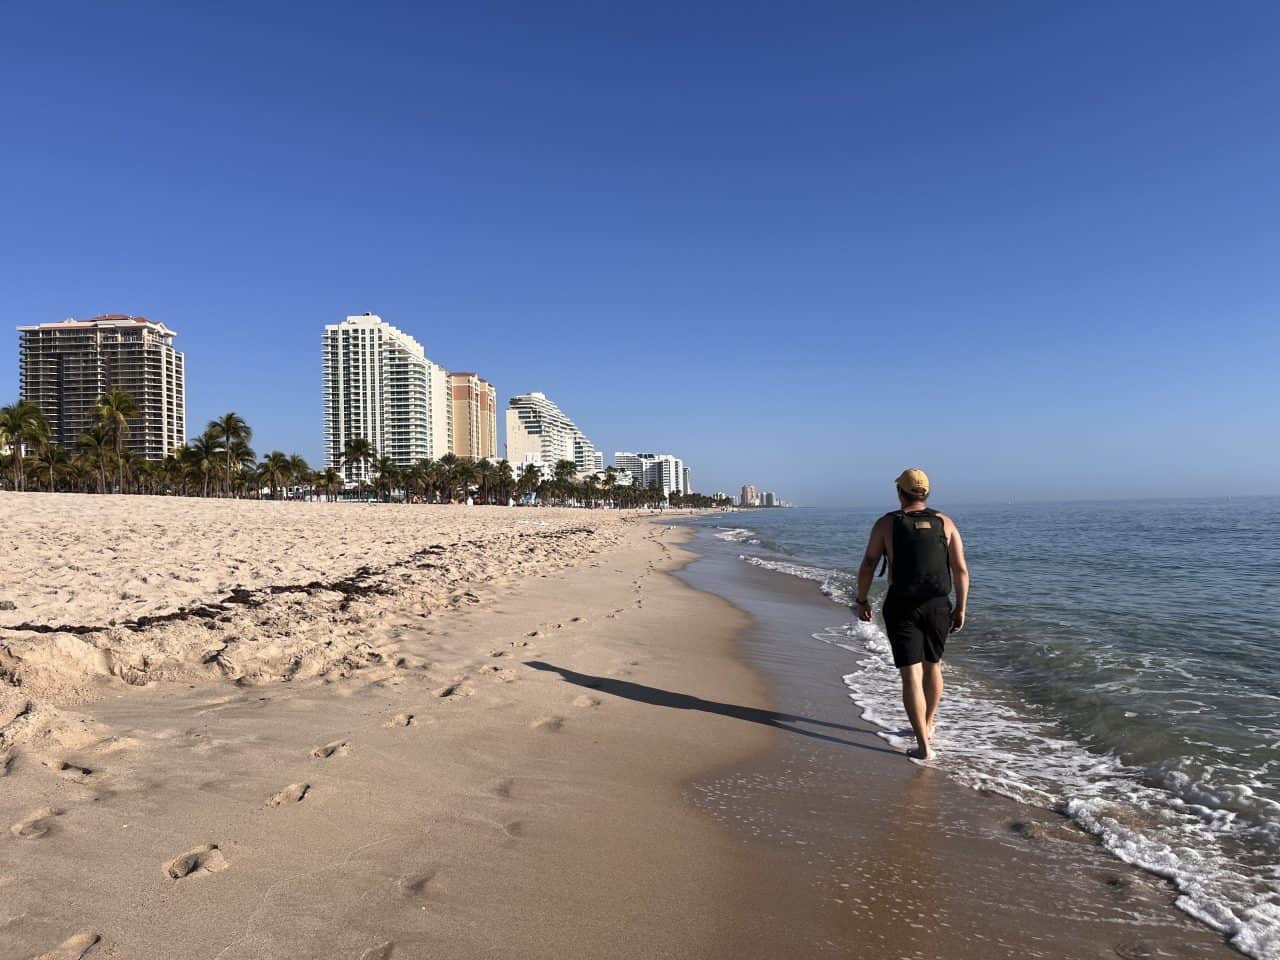 How To Spend Only One Day In Fort Lauderdale: 15 Top Things To Do